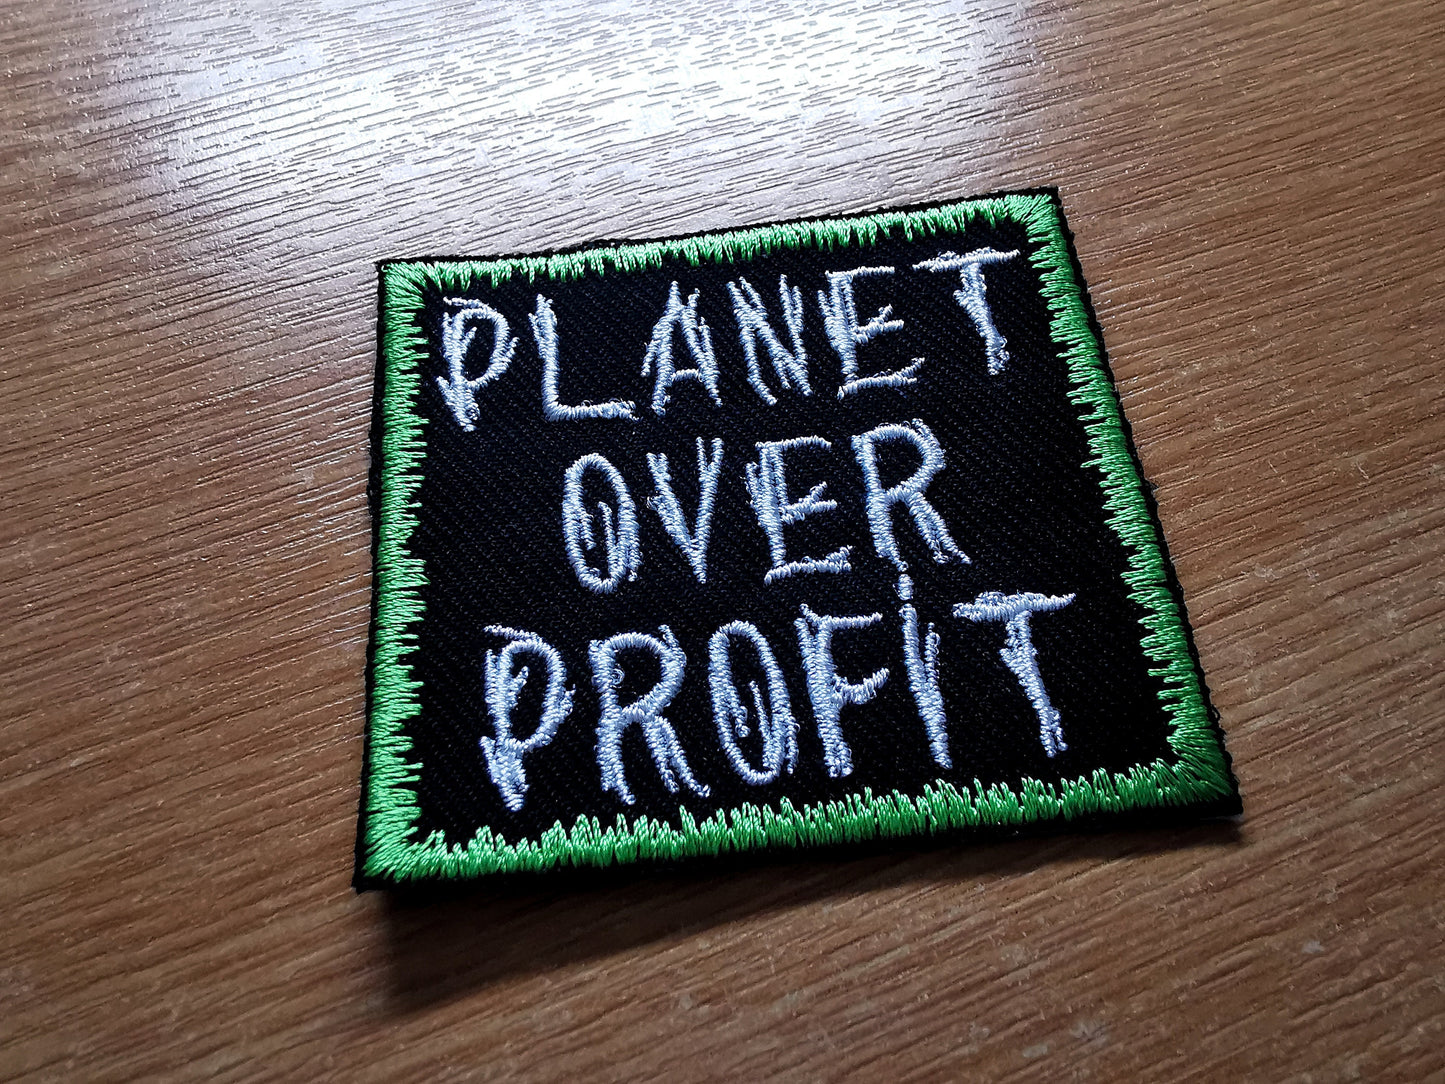 Planet Over Profit Embroidered Patch Climate Crisis Environmental Action